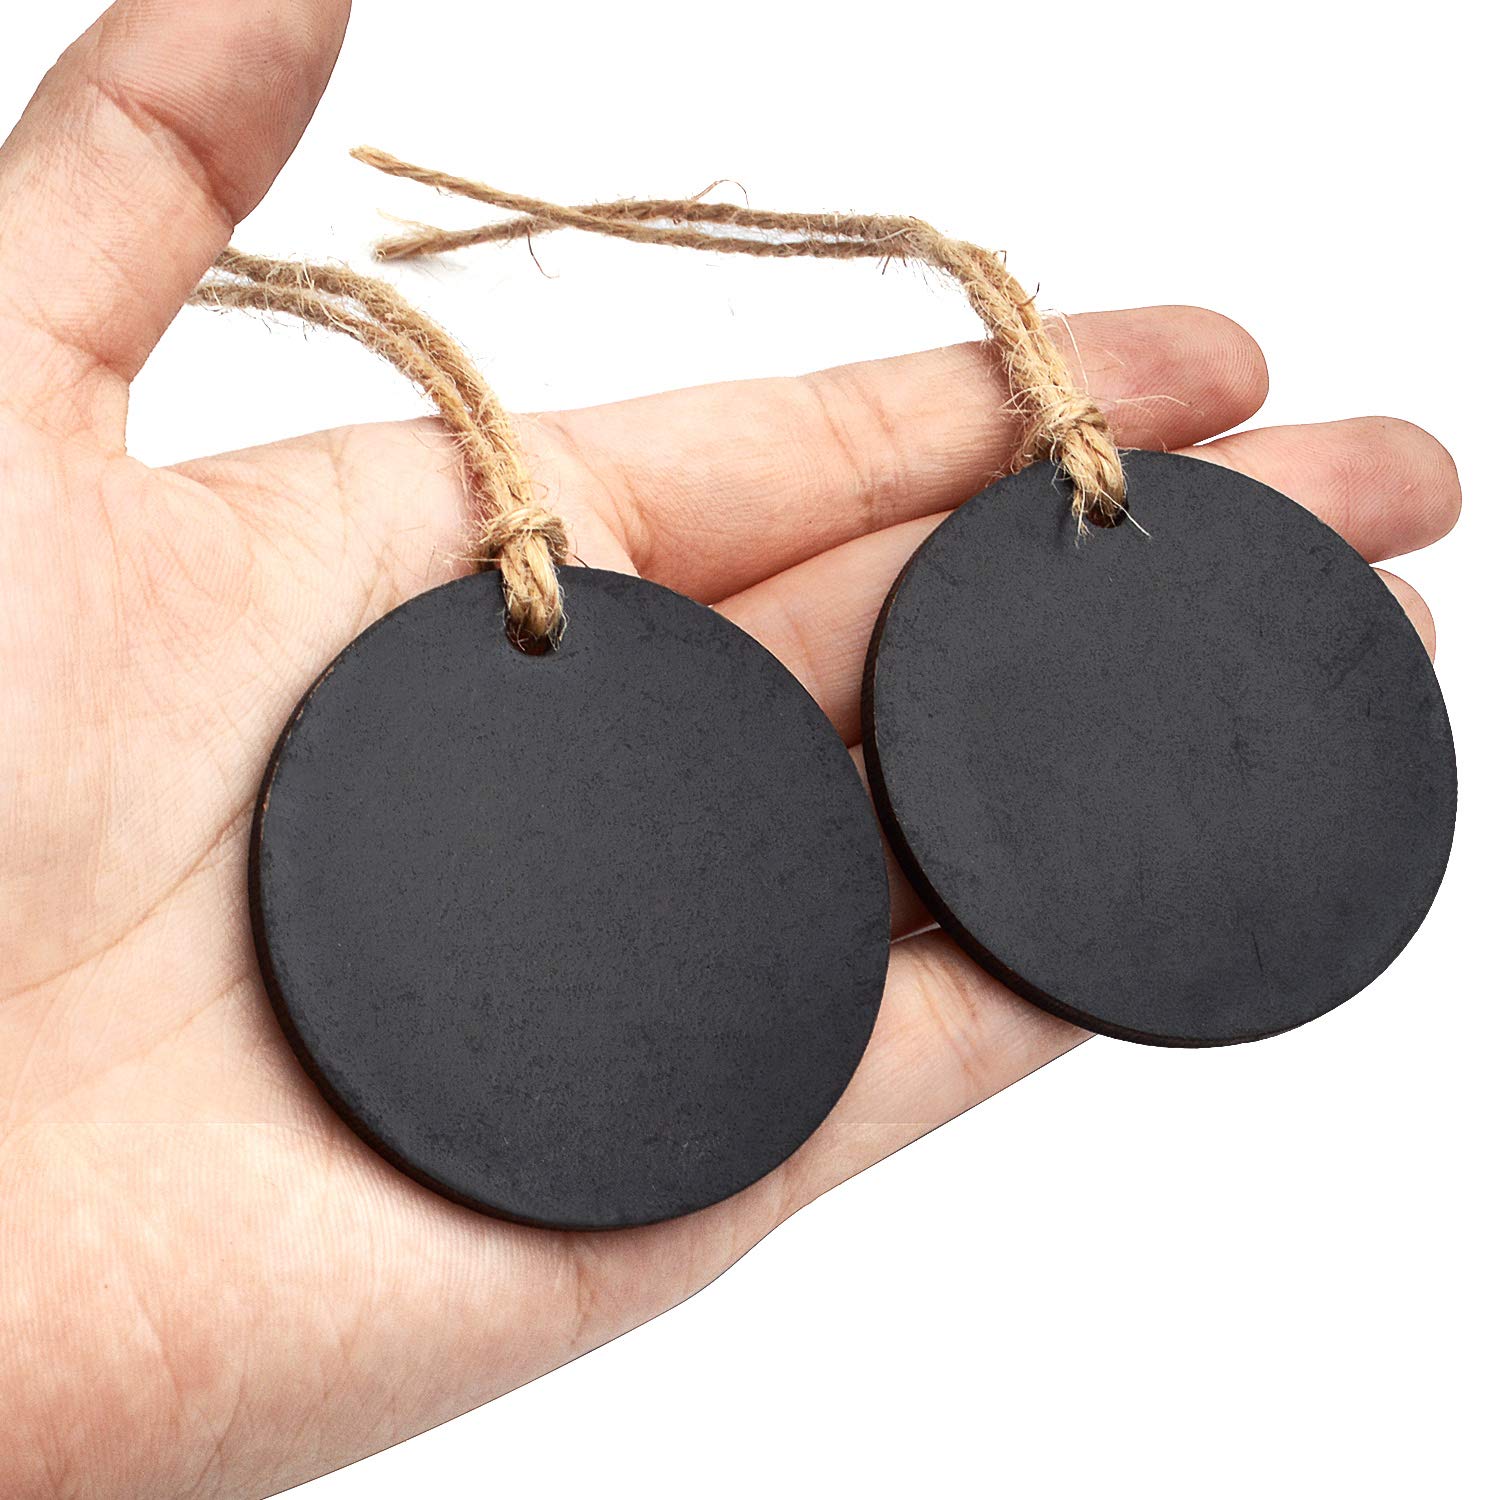 Blackboard Tags,10pcs 5cm Hanging Christmas Chalkboard Tags Mini Two-Sided Blackboard Round Christmas Chalkboard with String for Message Signs Table Numbers Price Tags